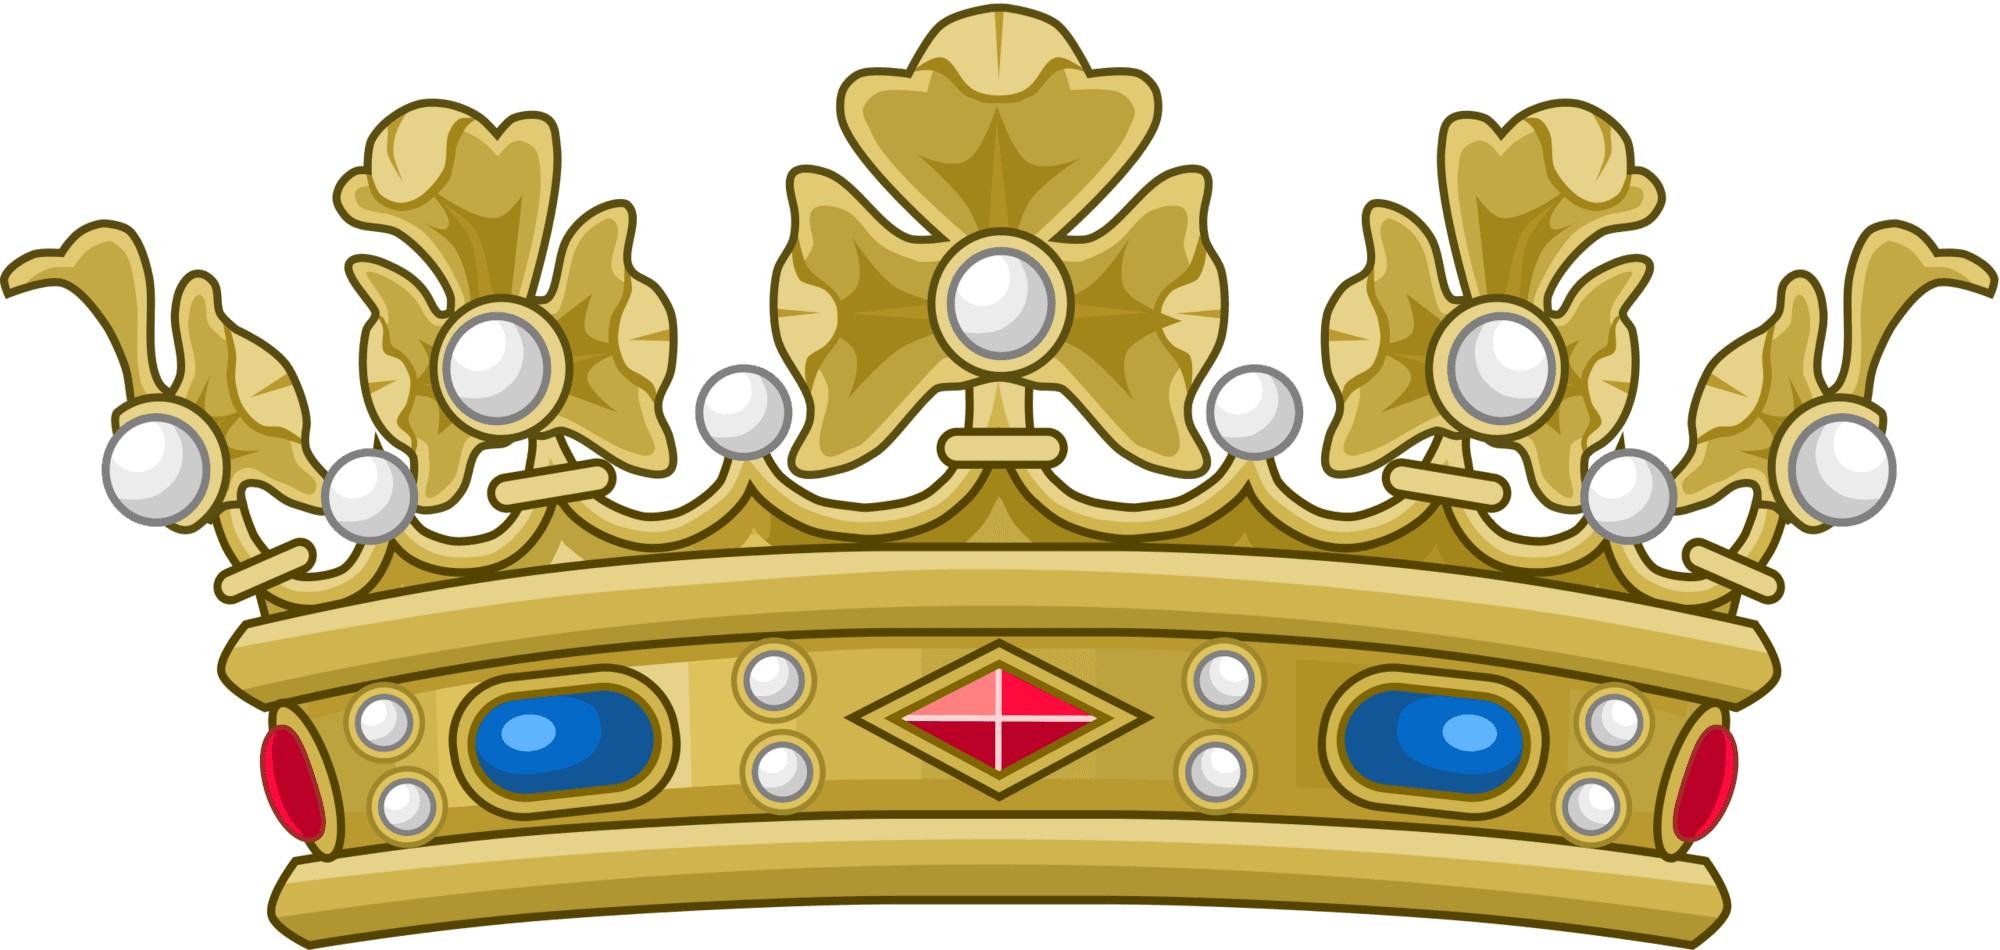 Queen crown of duke france variant clipart picture